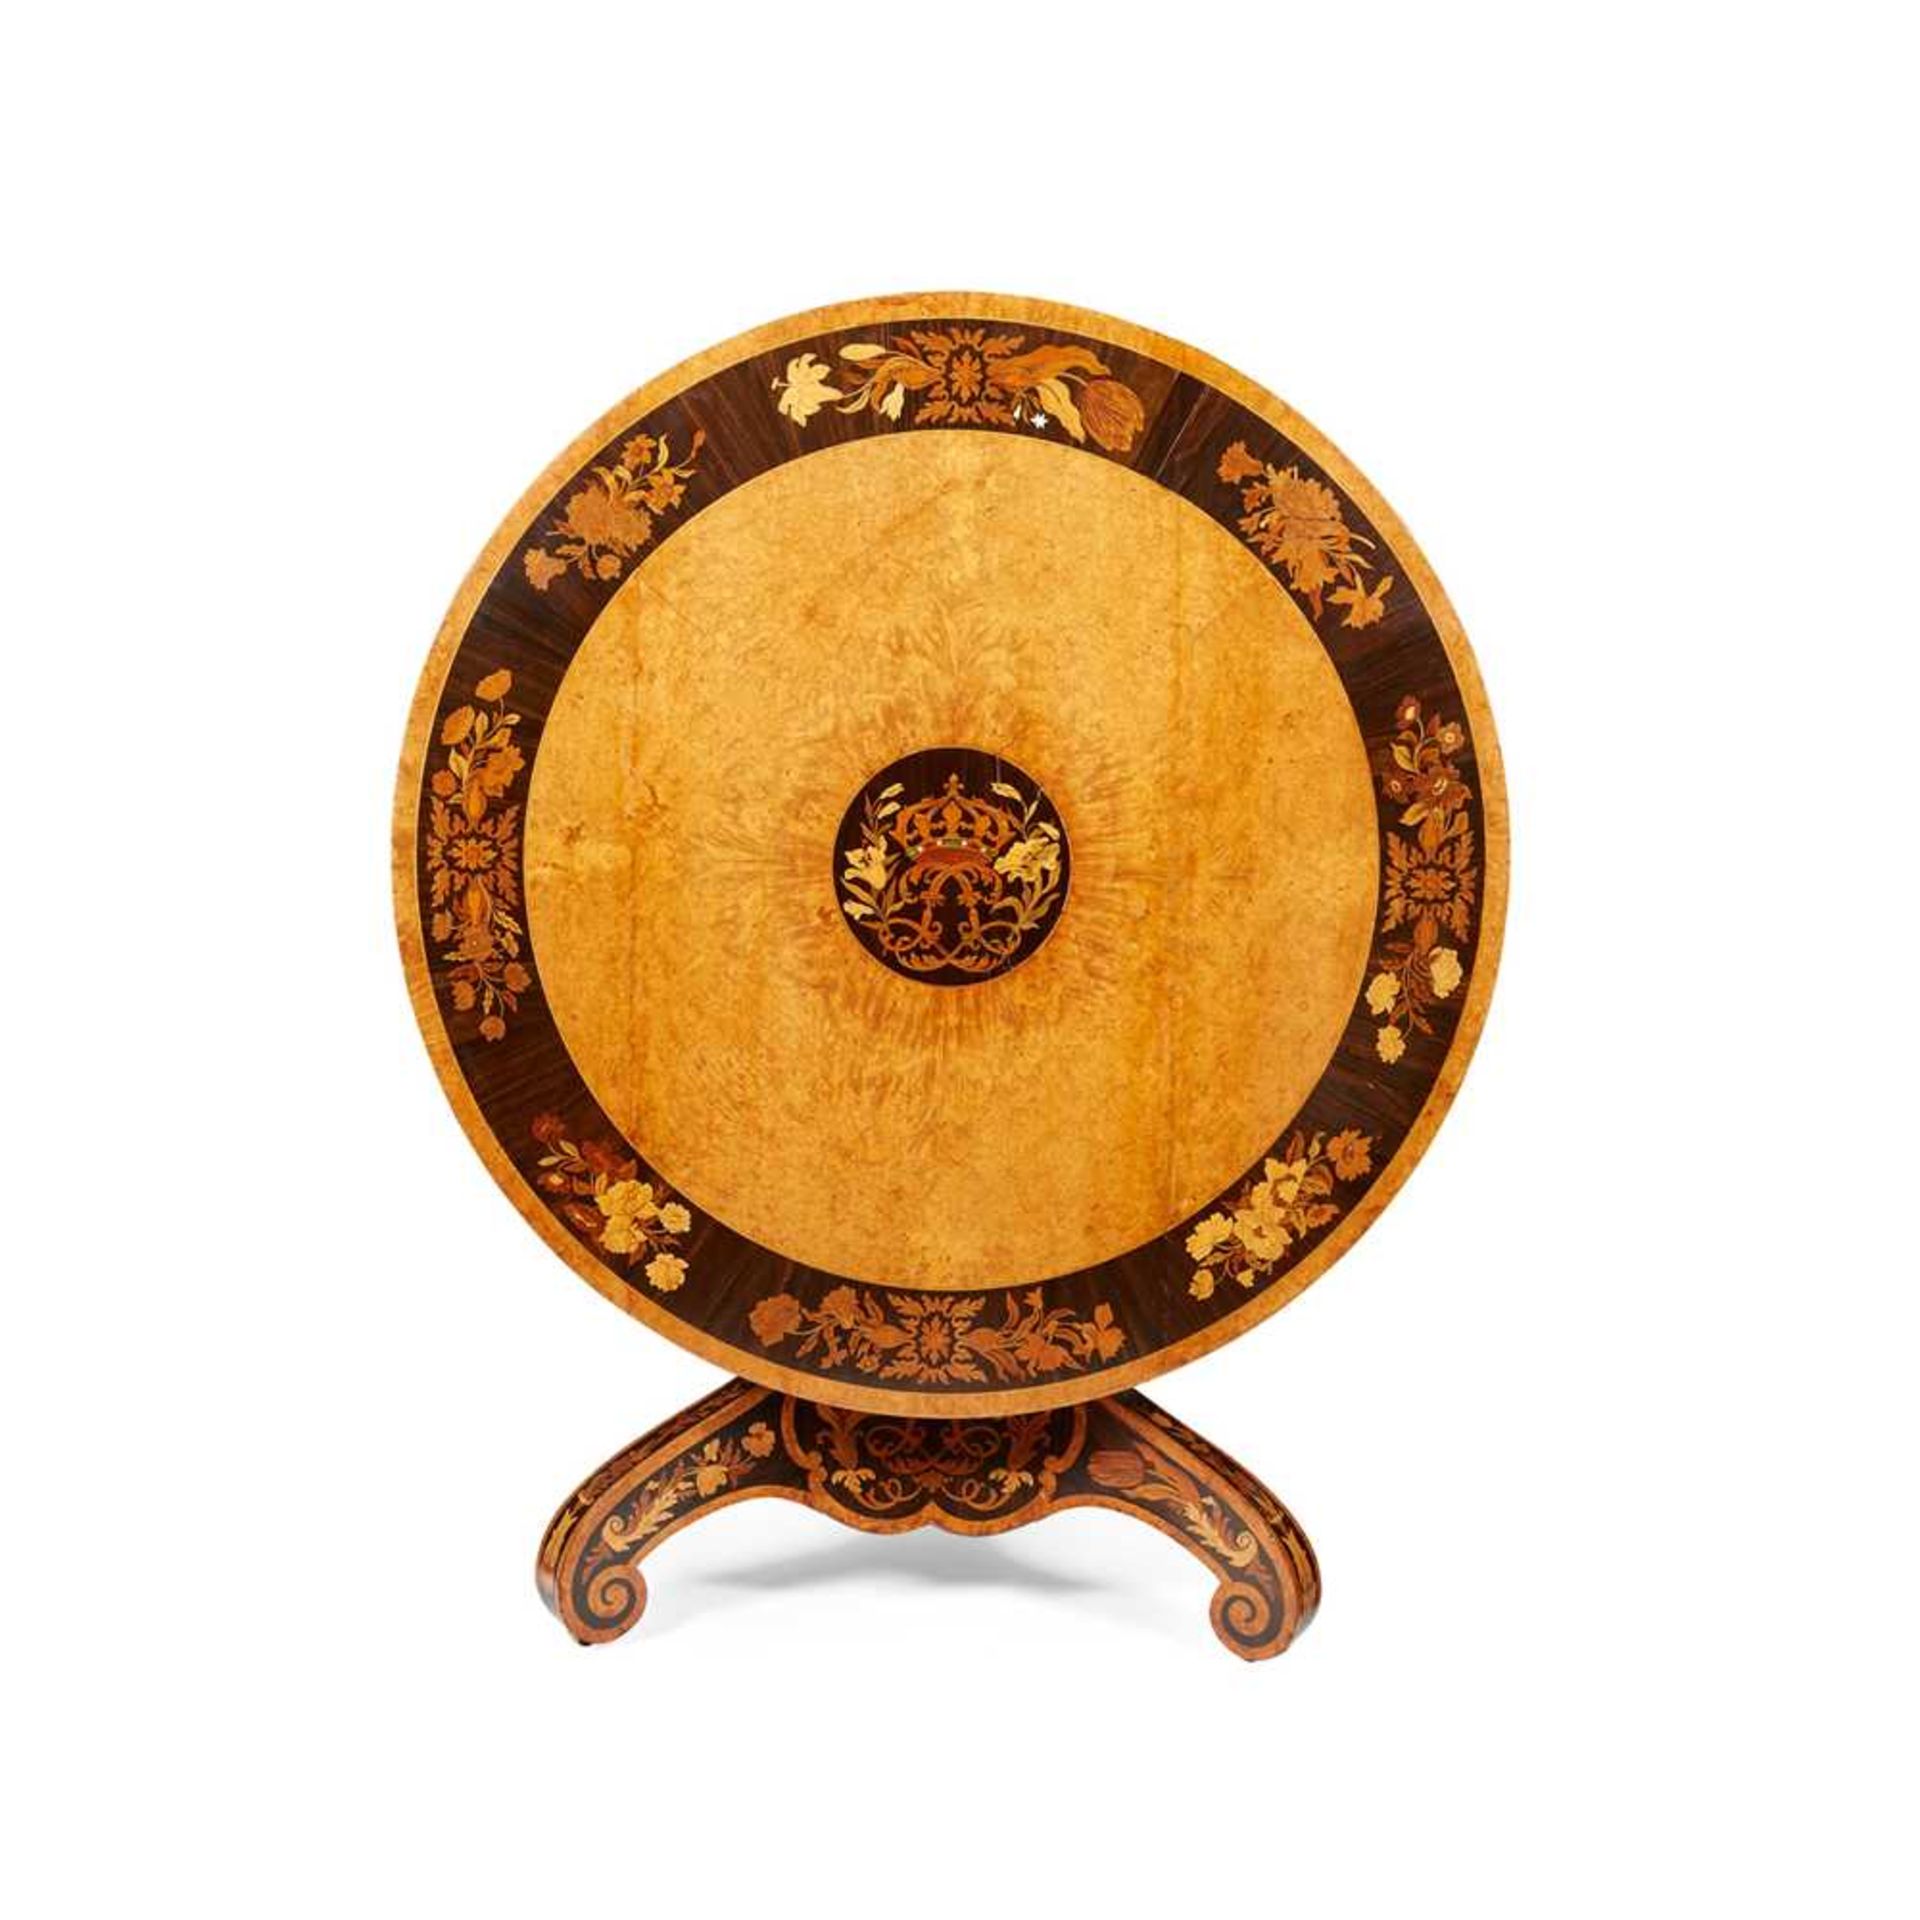 KING LOUIS-PHILIPPE'S AMBOYNA, WALNUT, IVORY AND EBONY MARQUETRY CENTRE TABLE, ATTRIBUTED TO GEORGE